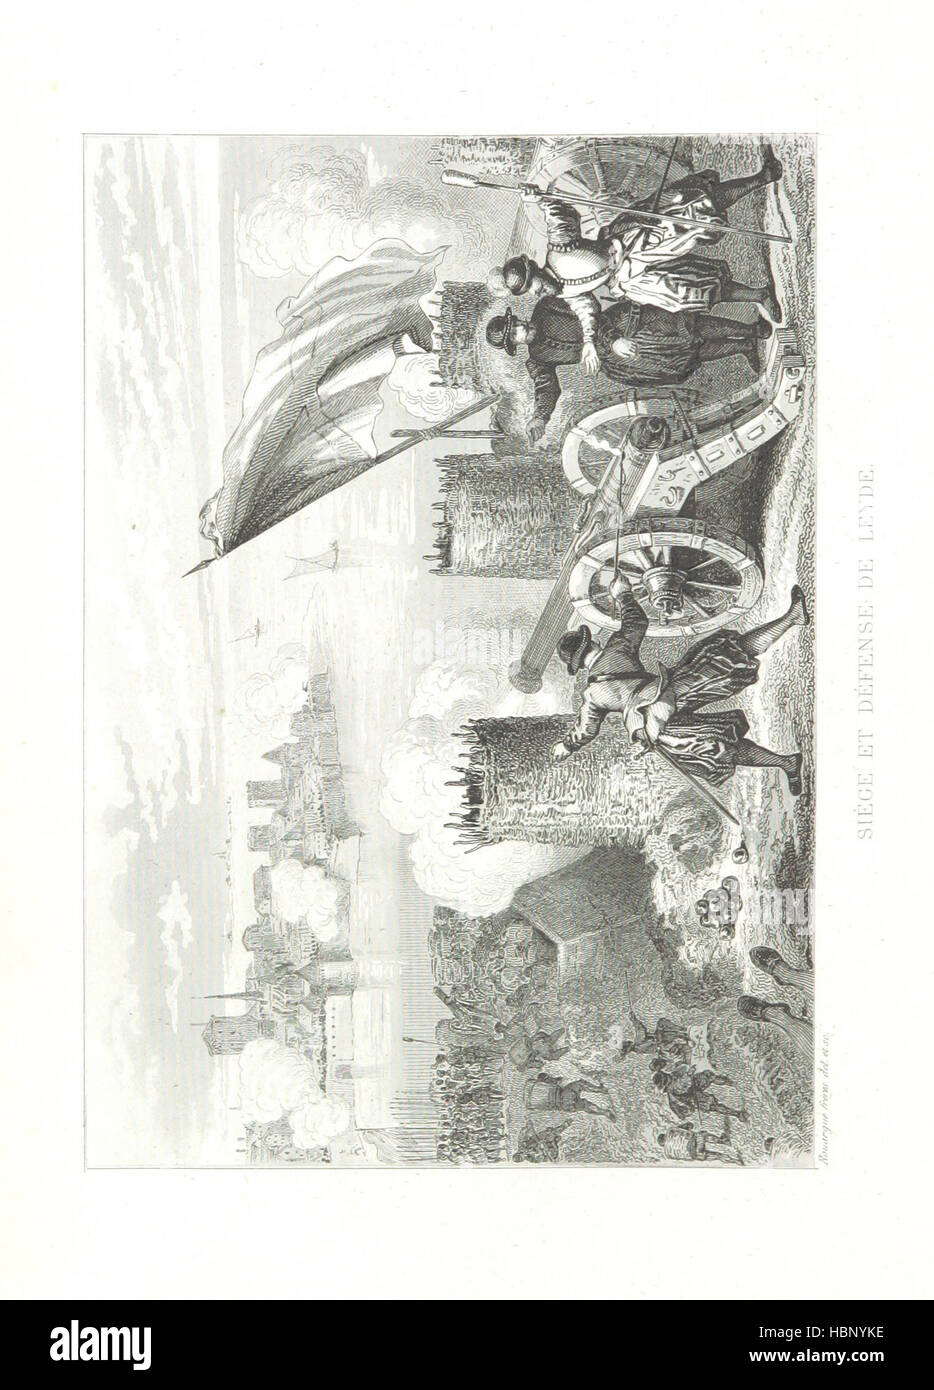 Image taken from page 106 of 'Guillaume le Taciturne et Stock Photo